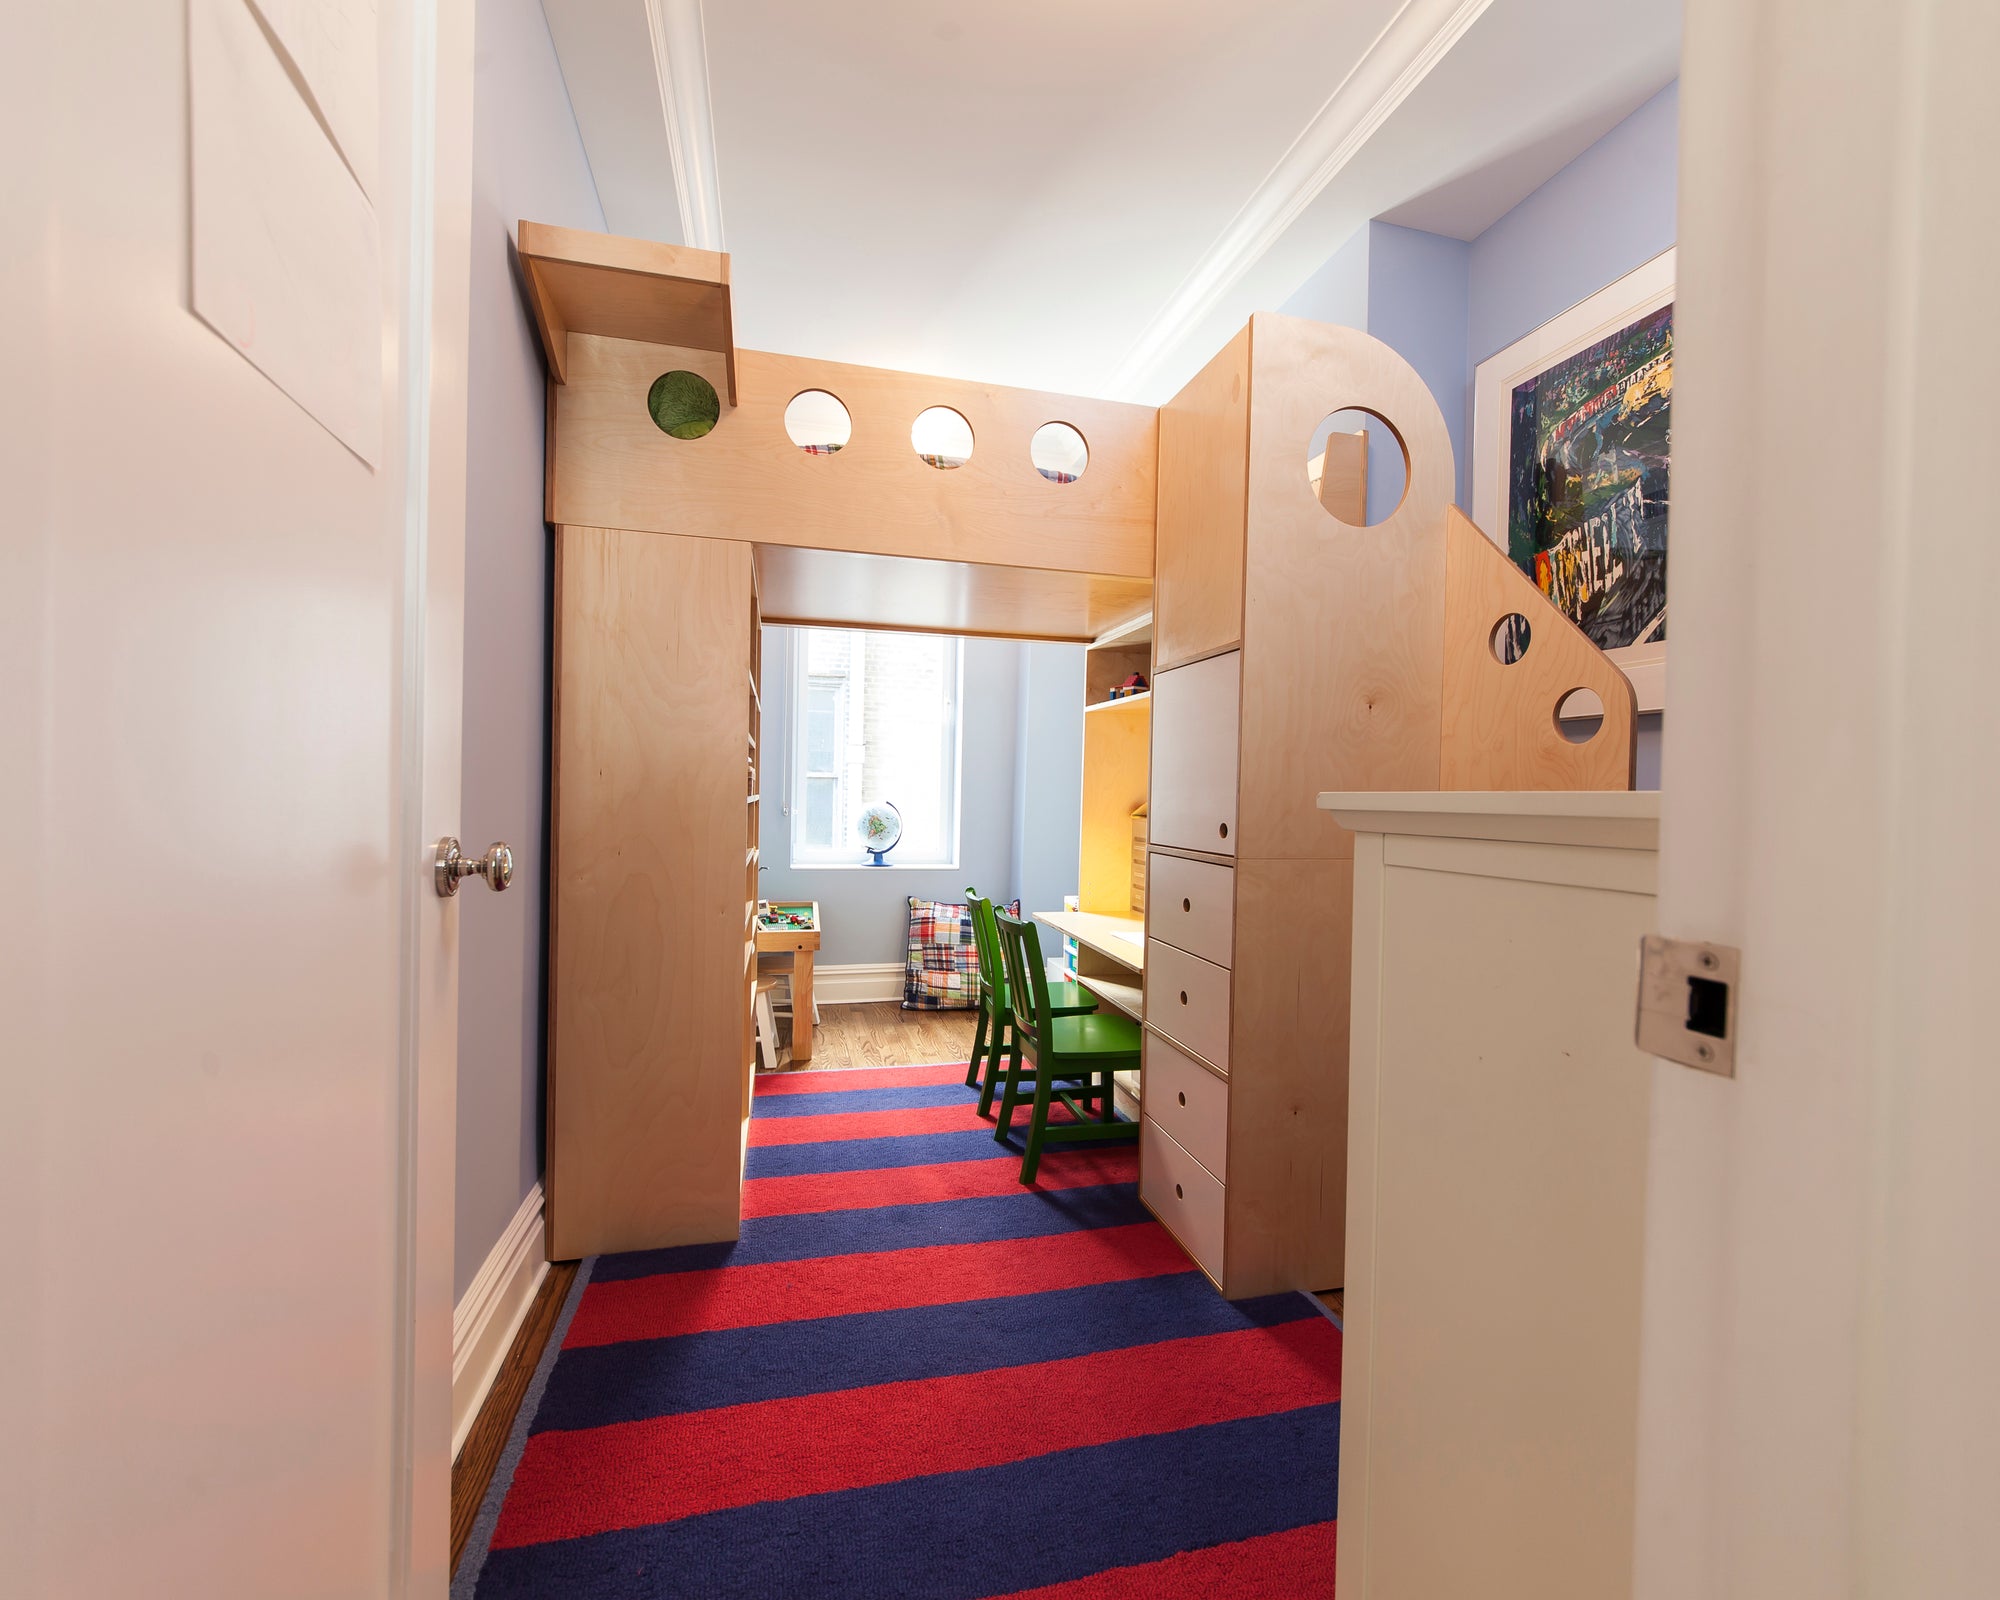 Colorful hallway with striped carpet, wooden furniture, and vibrant decor